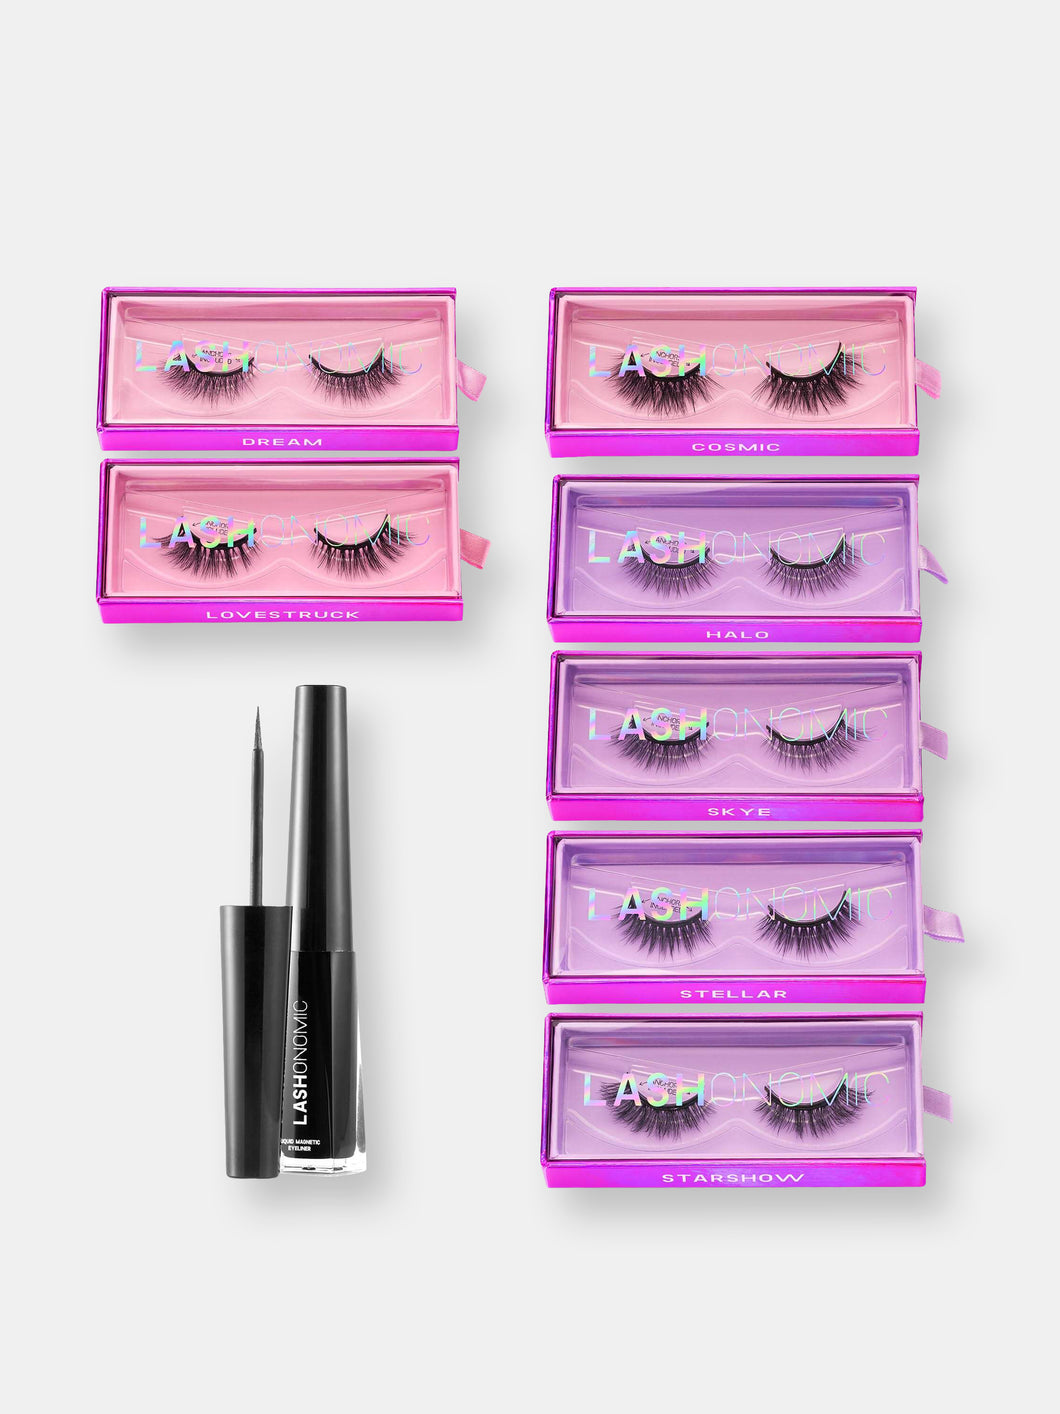 Milky Way Lashes & Liner Kit